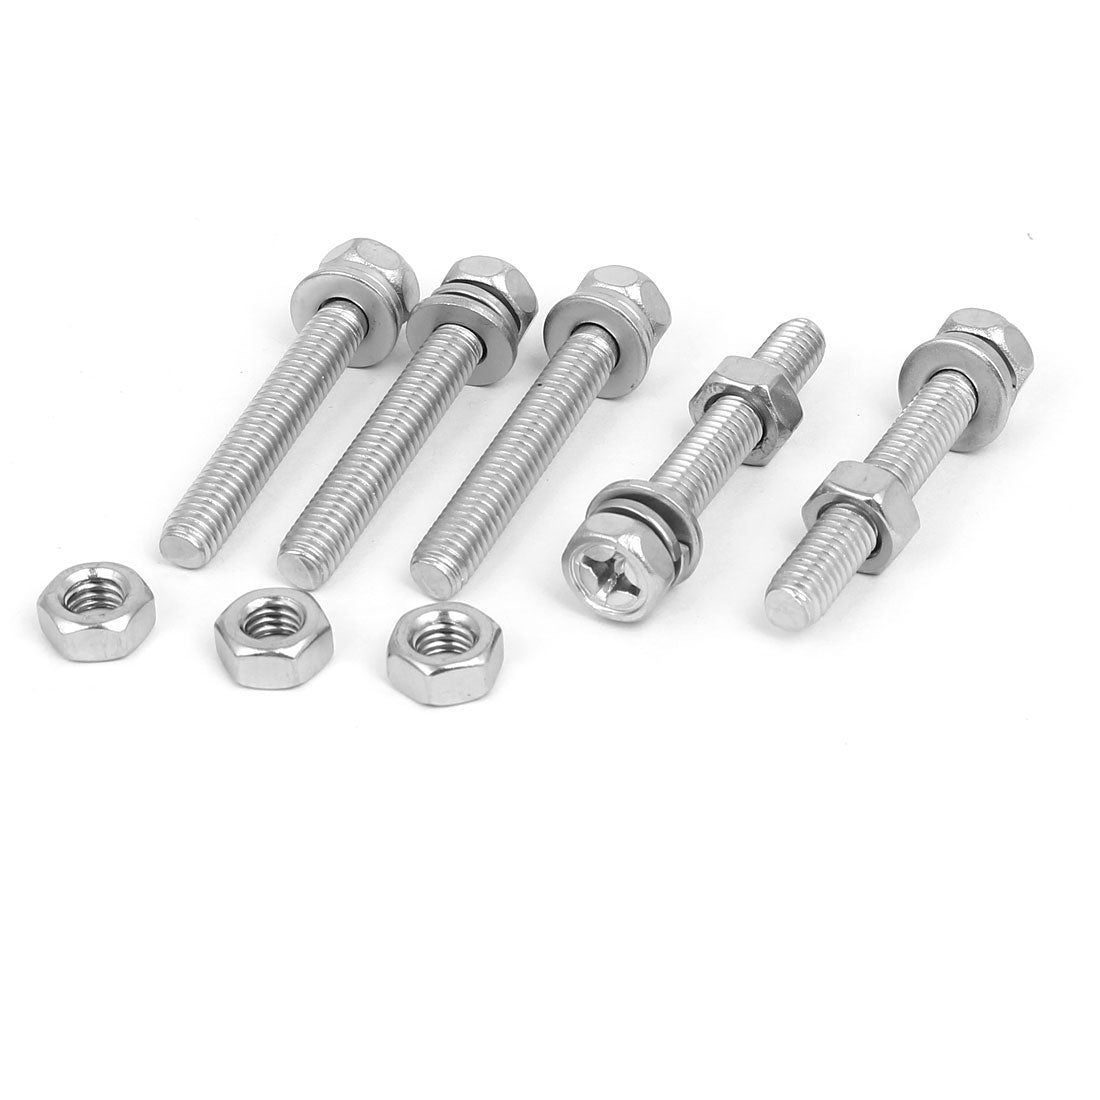 uxcell Uxcell M6 x 40mm 304 Stainless Steel Phillips Hex Head Bolts Nuts w Washers 5 Sets